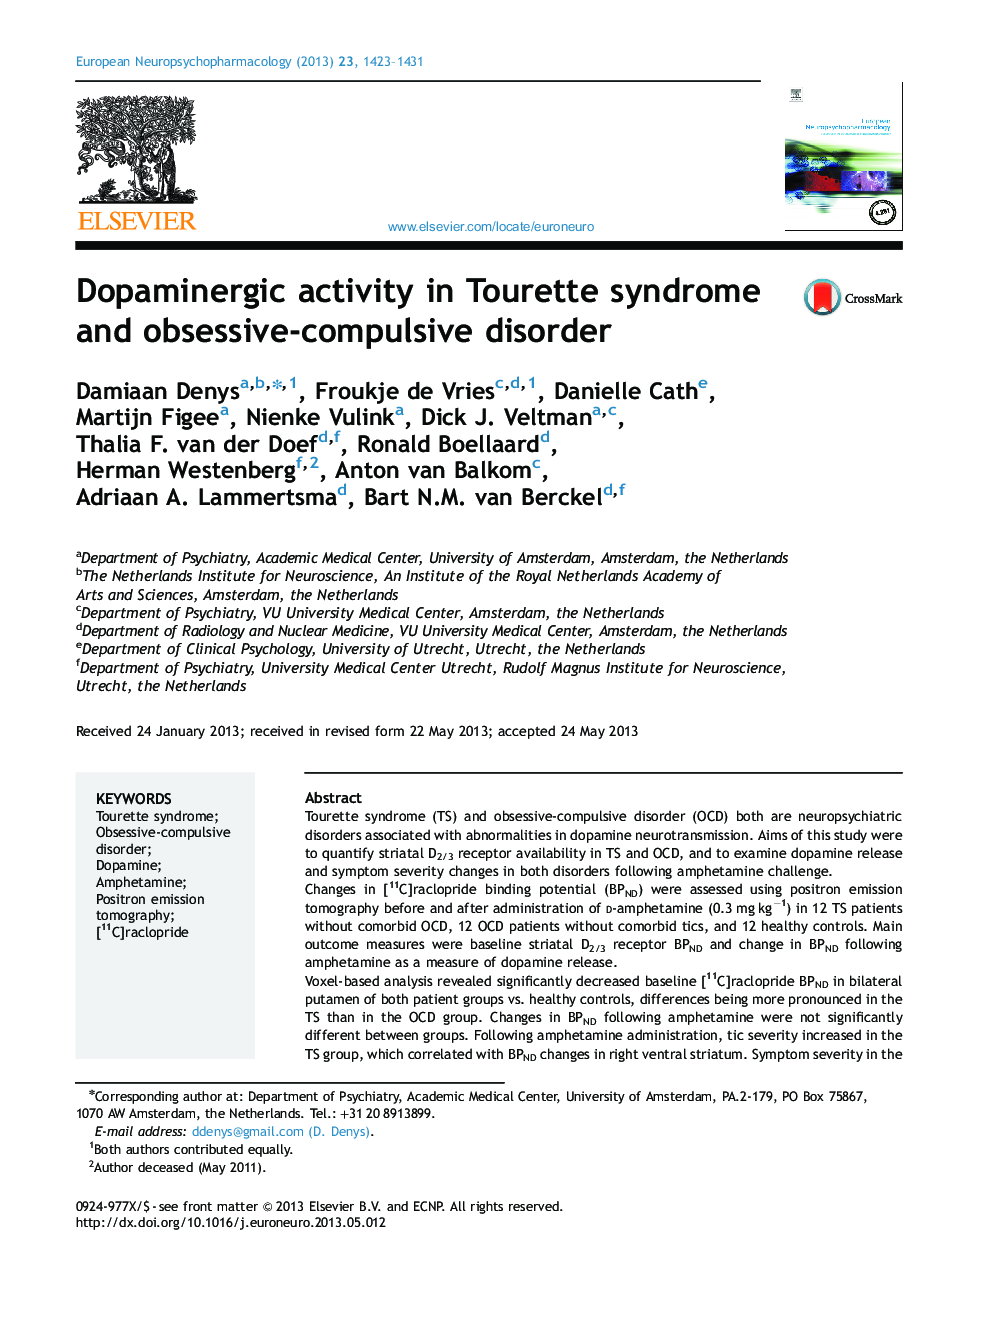 Dopaminergic activity in Tourette syndrome and obsessive-compulsive disorder